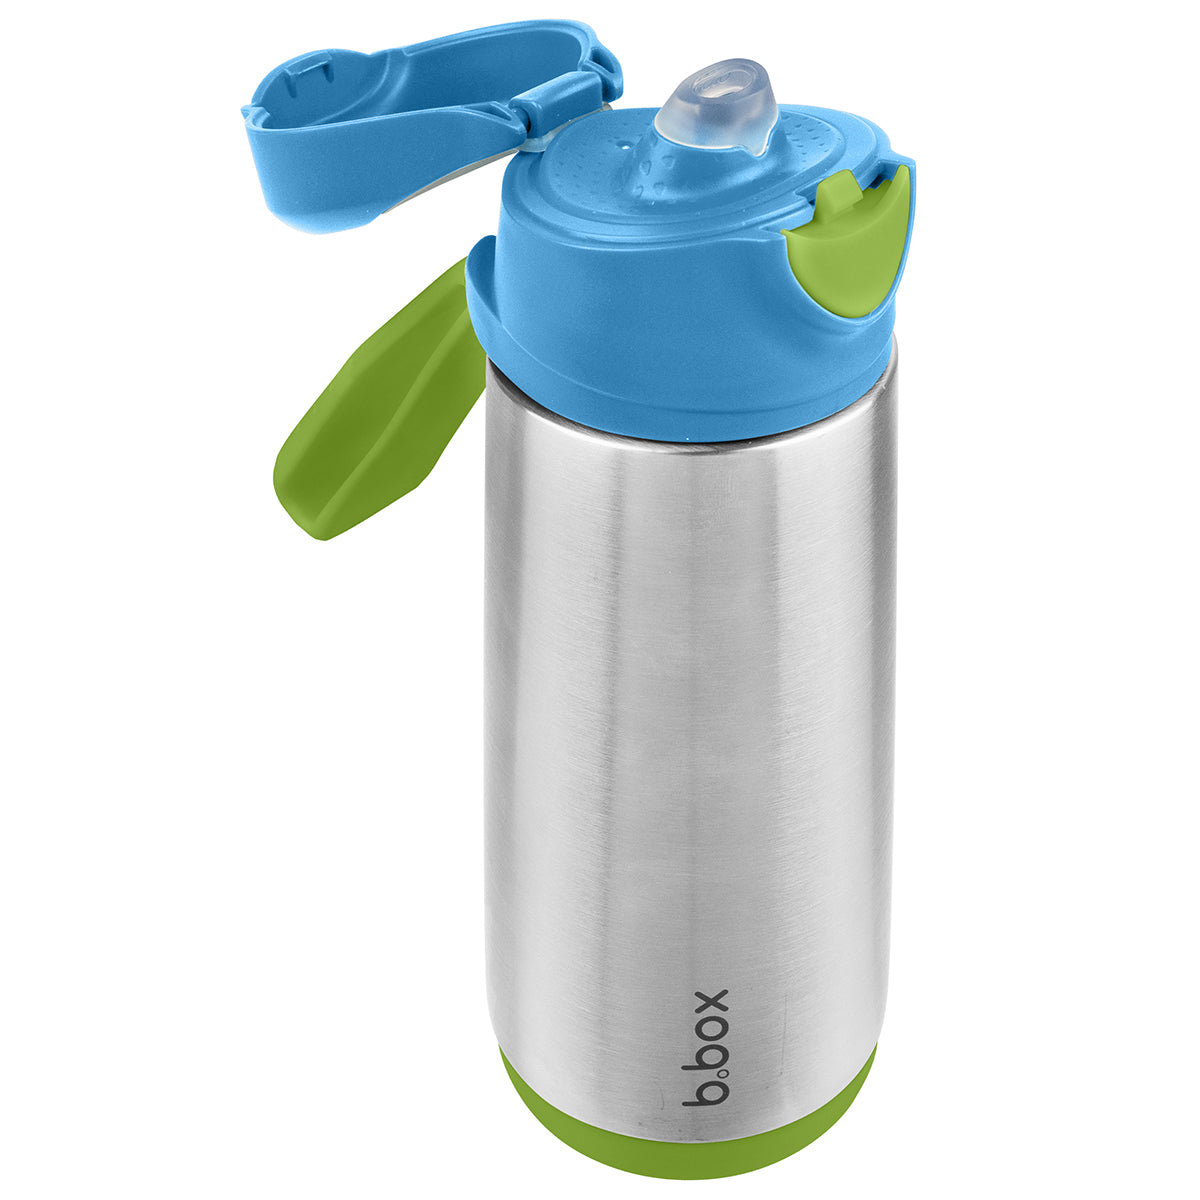 Thermos Foogo Tritan Leak-Proof Sippy Cup with Handles 8 oz (More